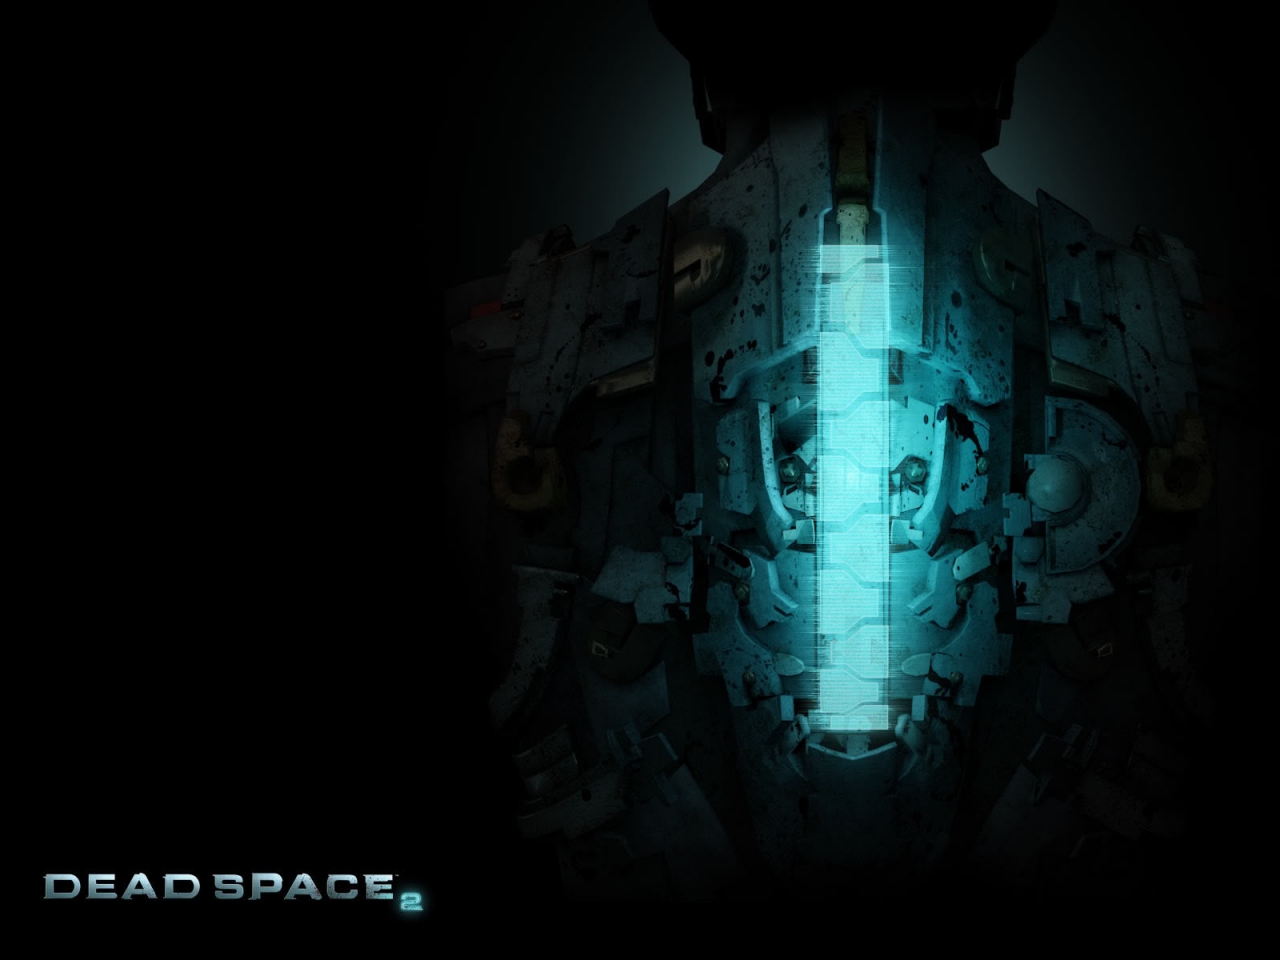 Dead Space 2 Art for 1280 x 960 resolution